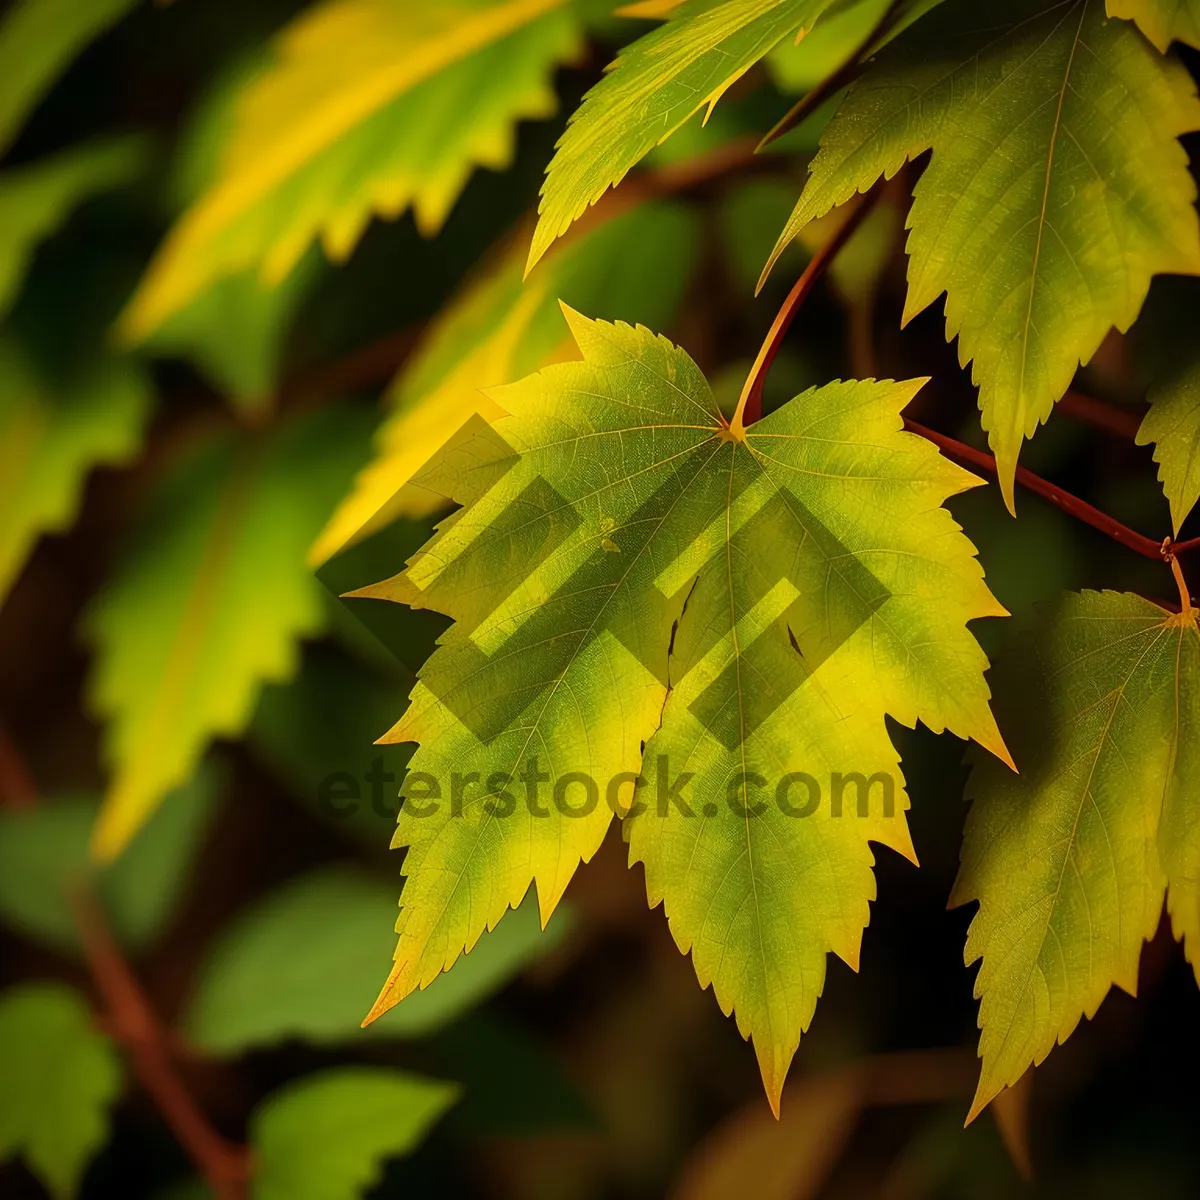 Picture of Vibrant Maple Leaf in Autumn Forest